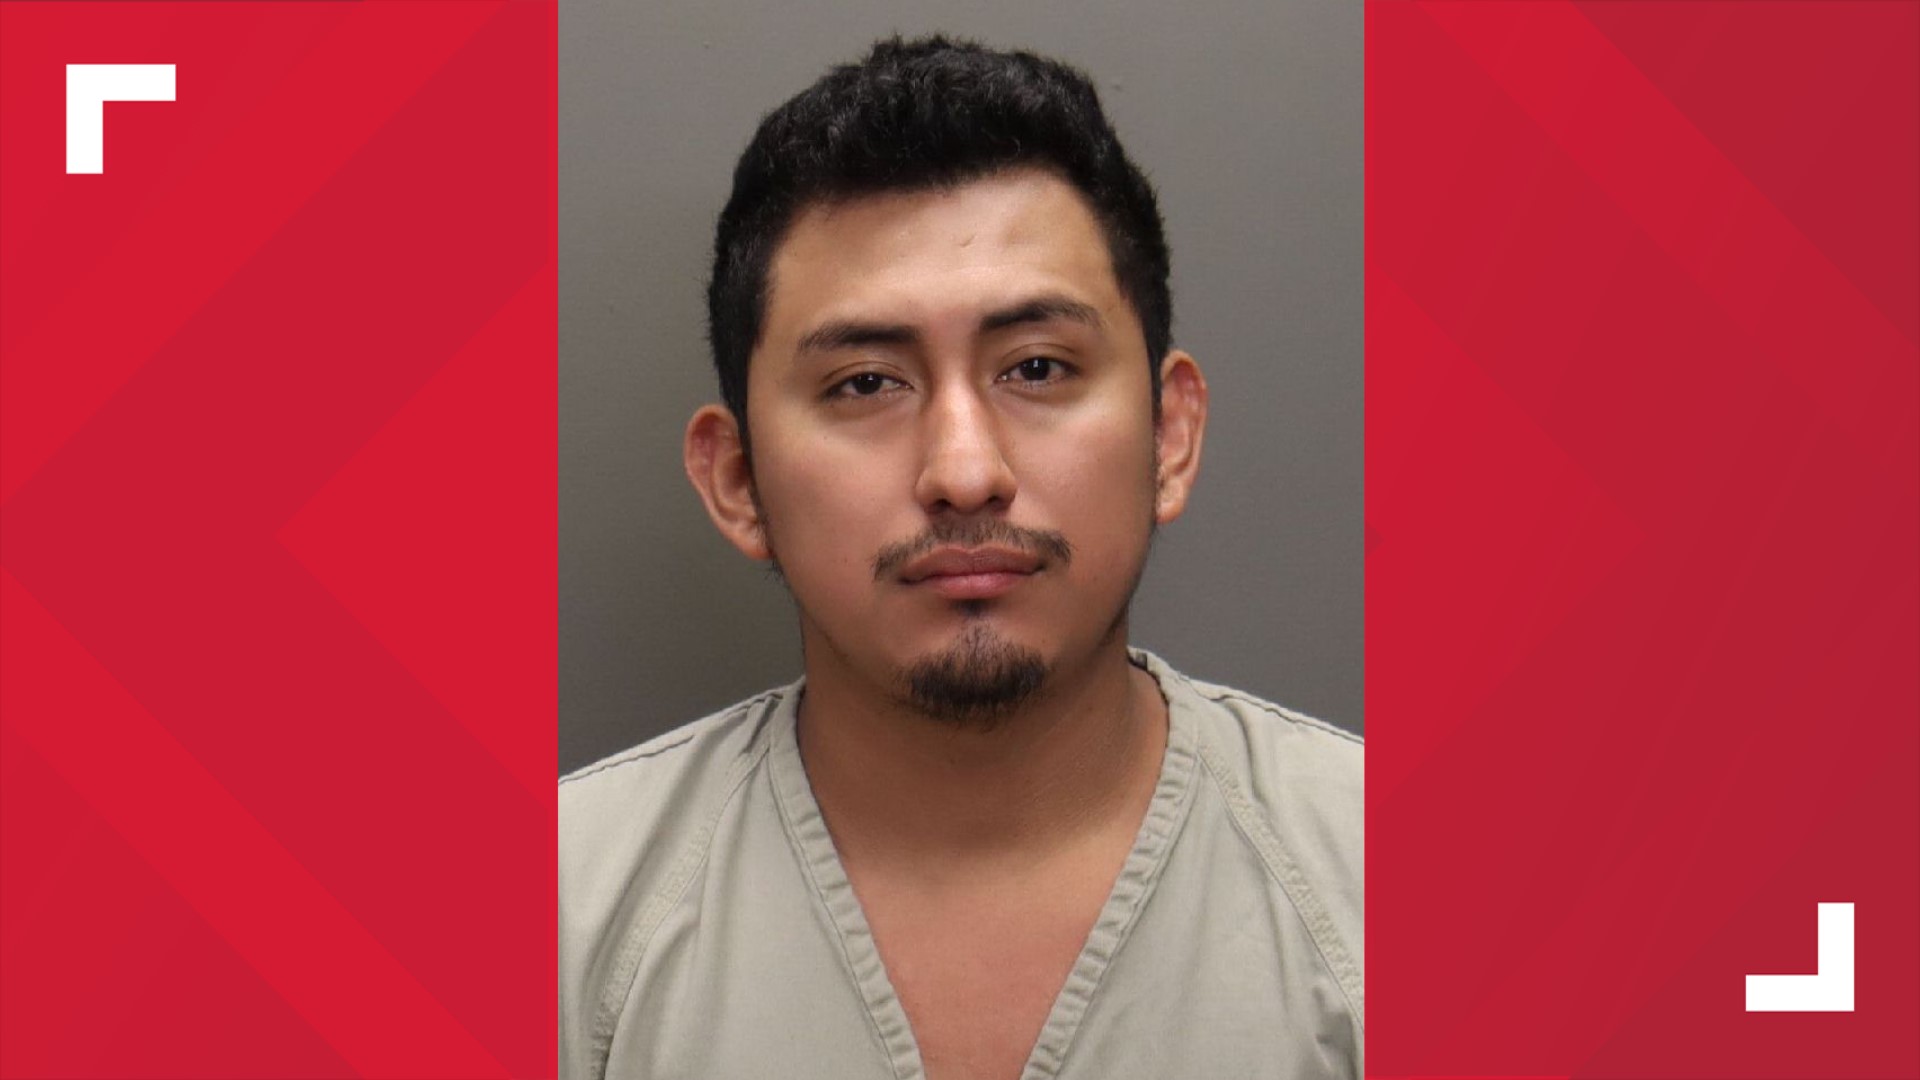 According to court records, 27-year-old Gerson Fuentes is facing two felony counts of rape.